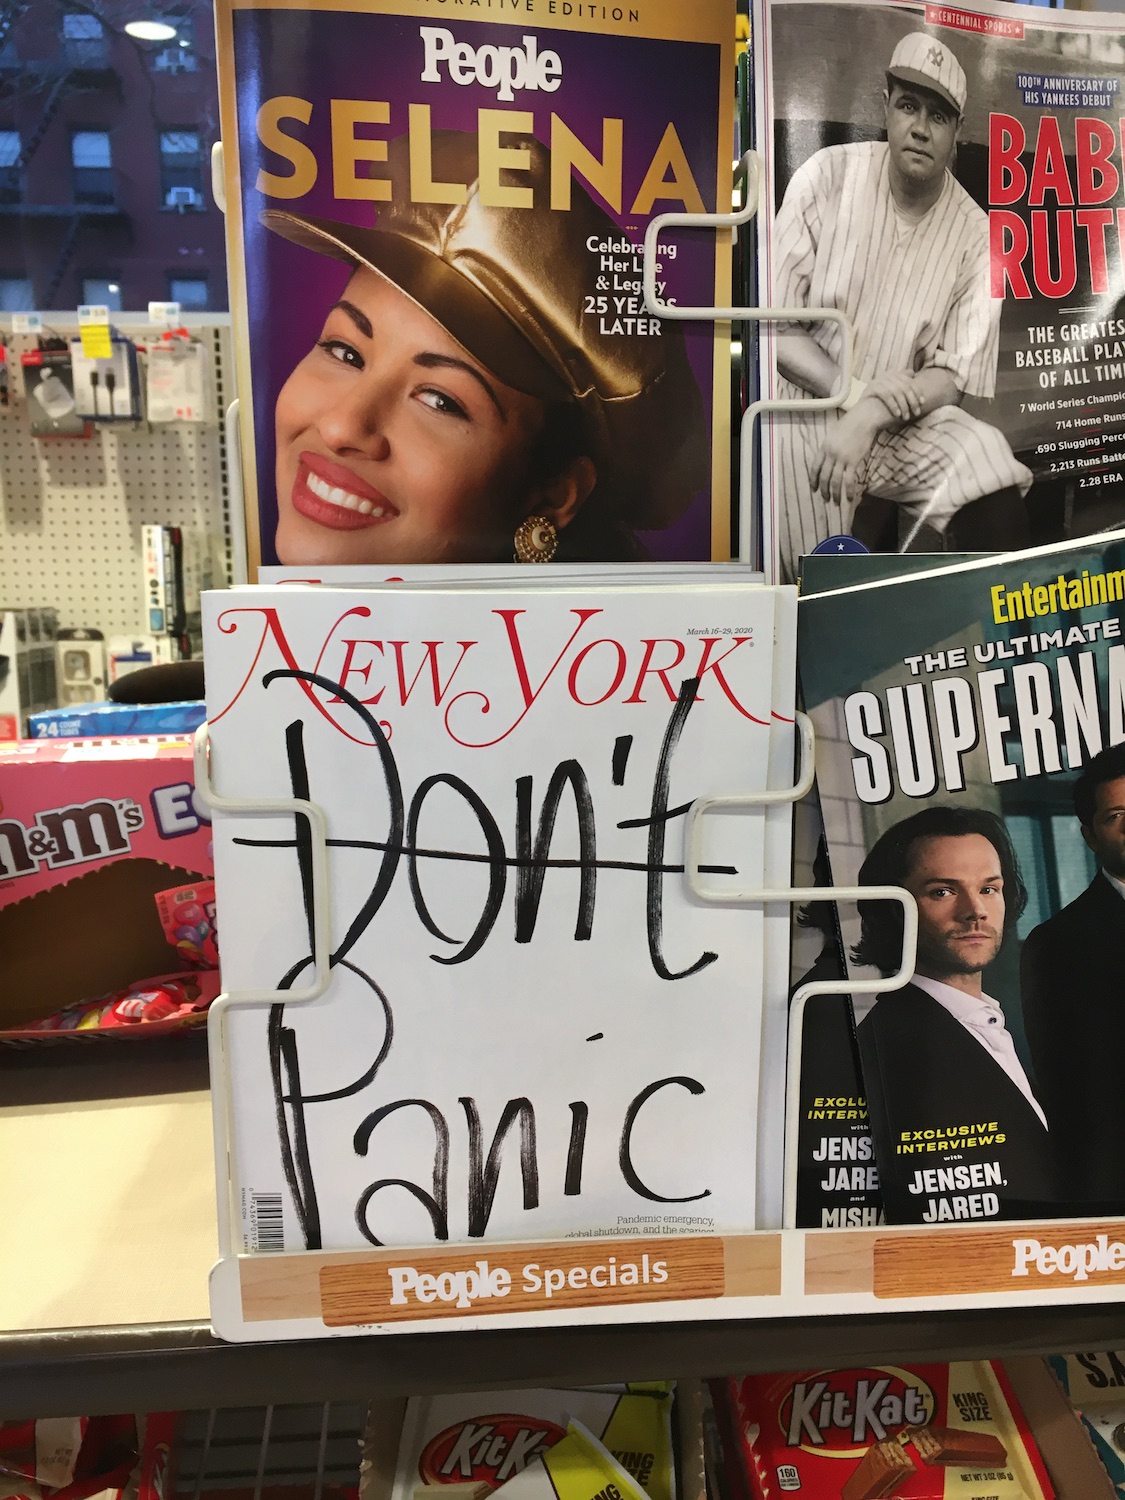 The “New York” magazine on the supermarket shelf writes “Don’t Panic” on its cover. 